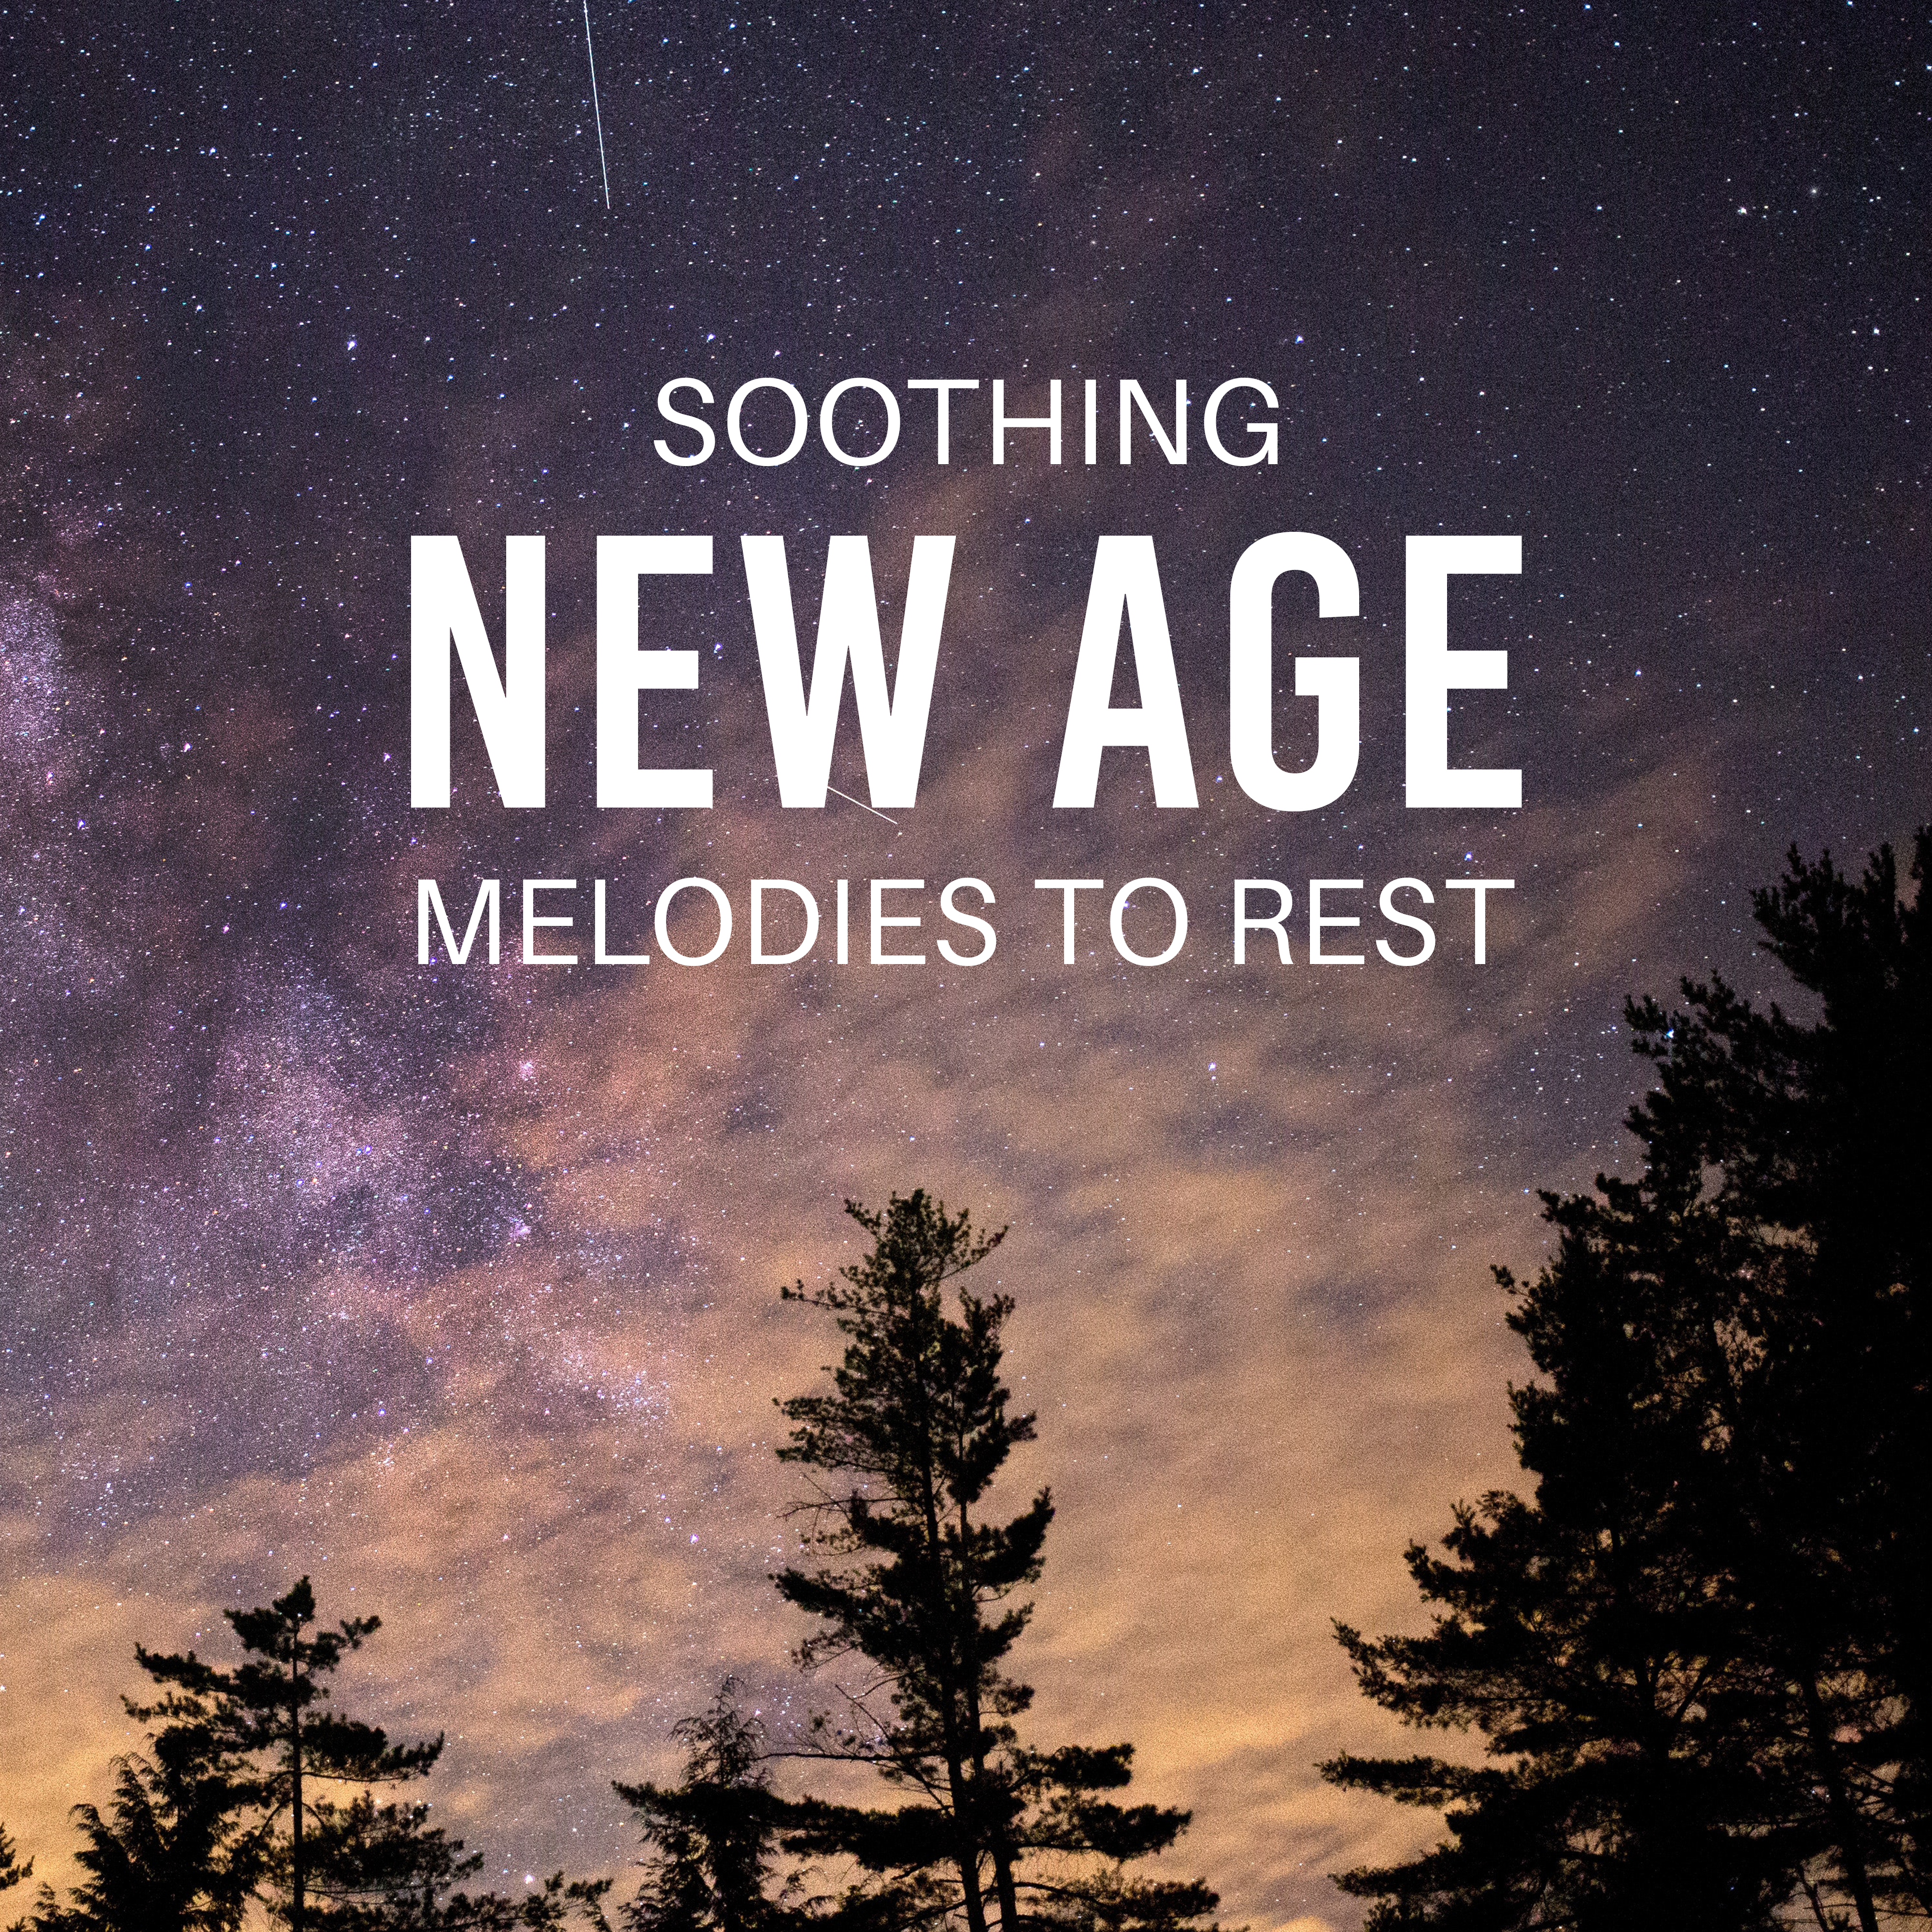 Soothing New Age Melodies to Rest